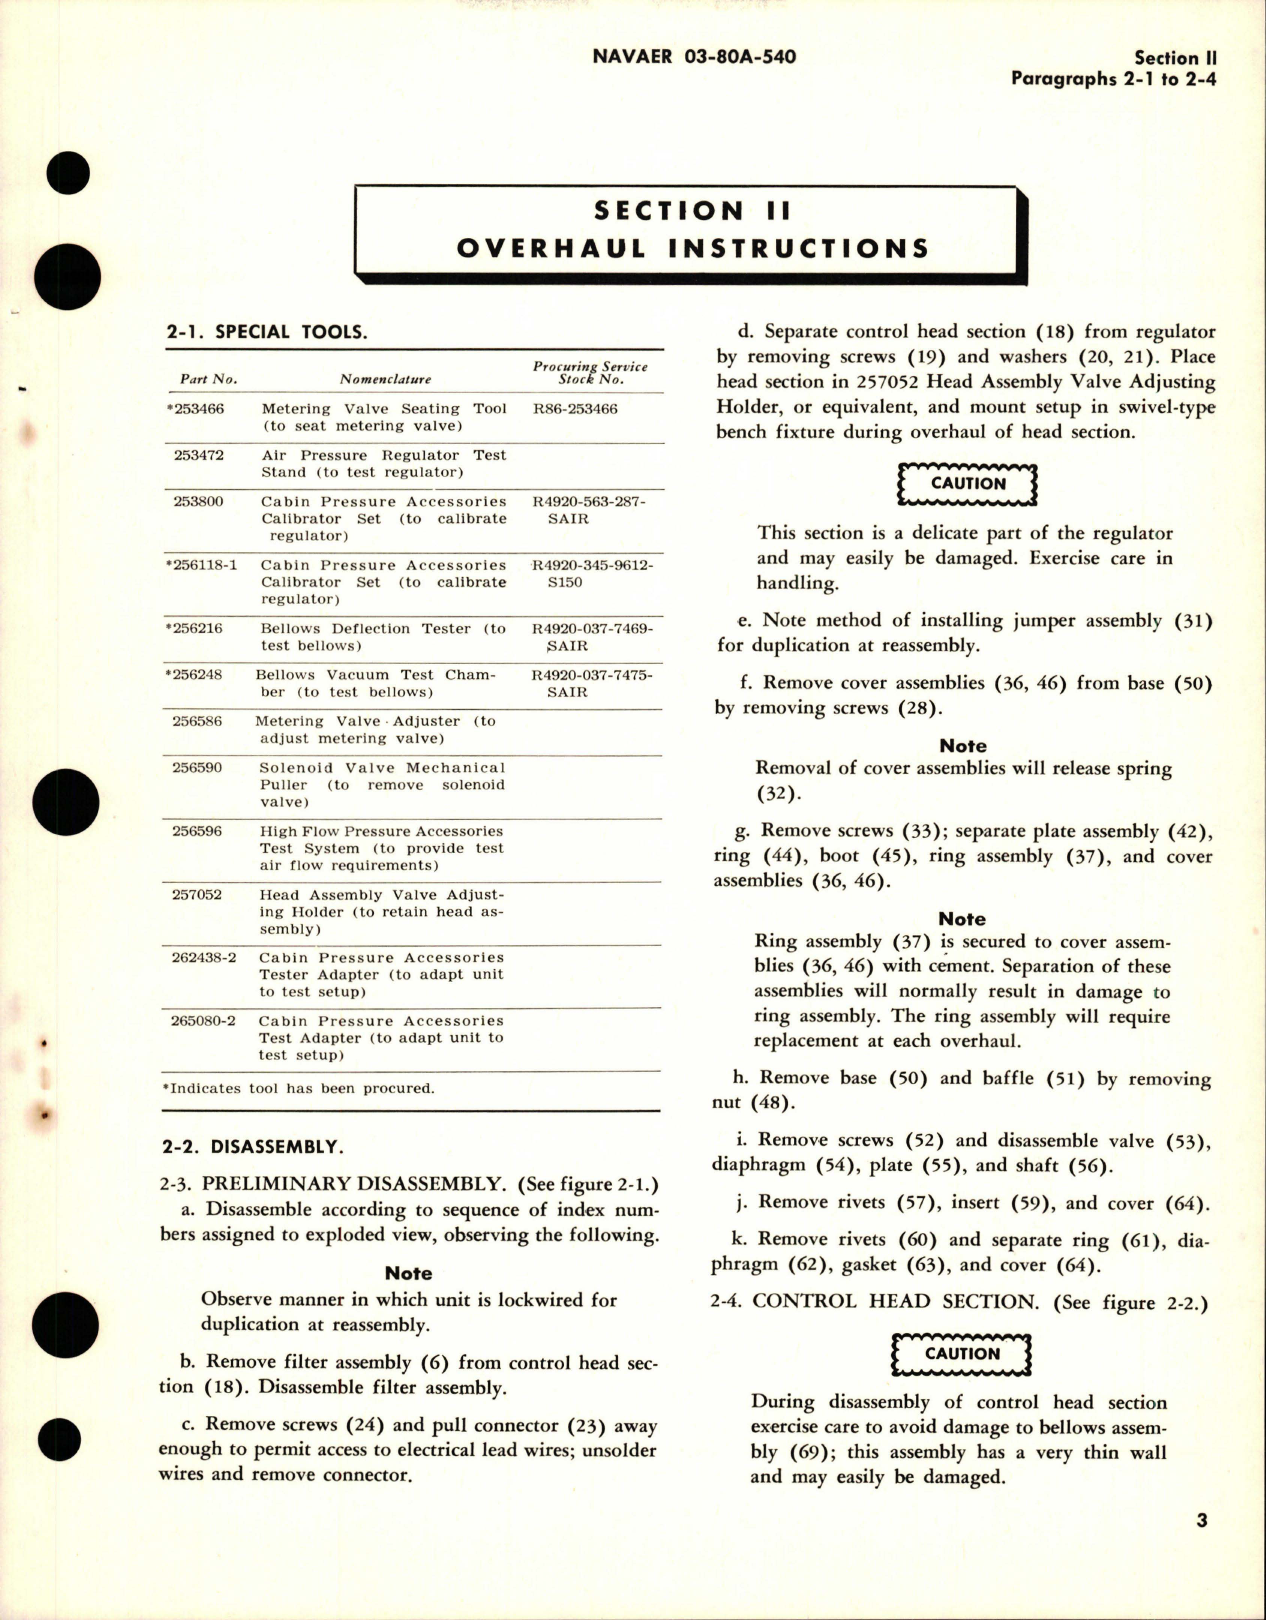 Sample page 7 from AirCorps Library document: Overhaul Instructions for Aircraft Cabin Air Pressure Regulator - Part 102068-3 - Model CPRP112-2 